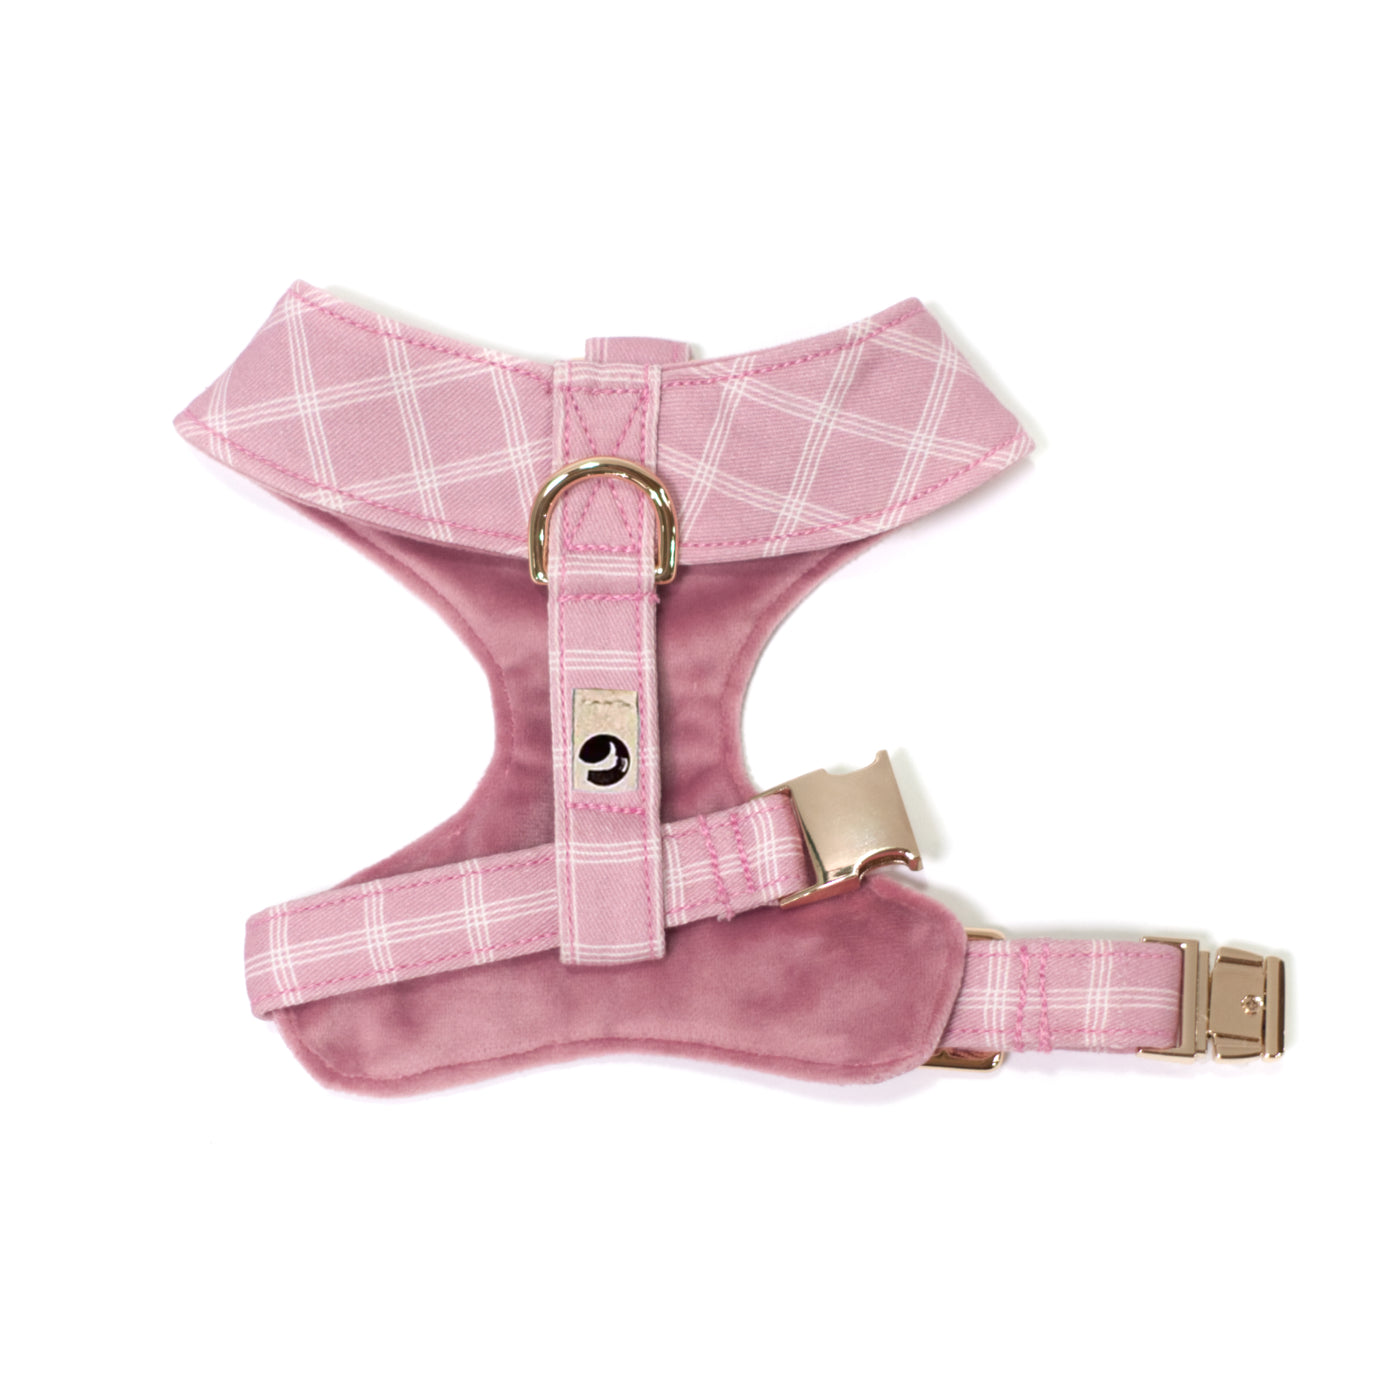 Size extra small light pink plaid and velvet dog harness shown from top/back